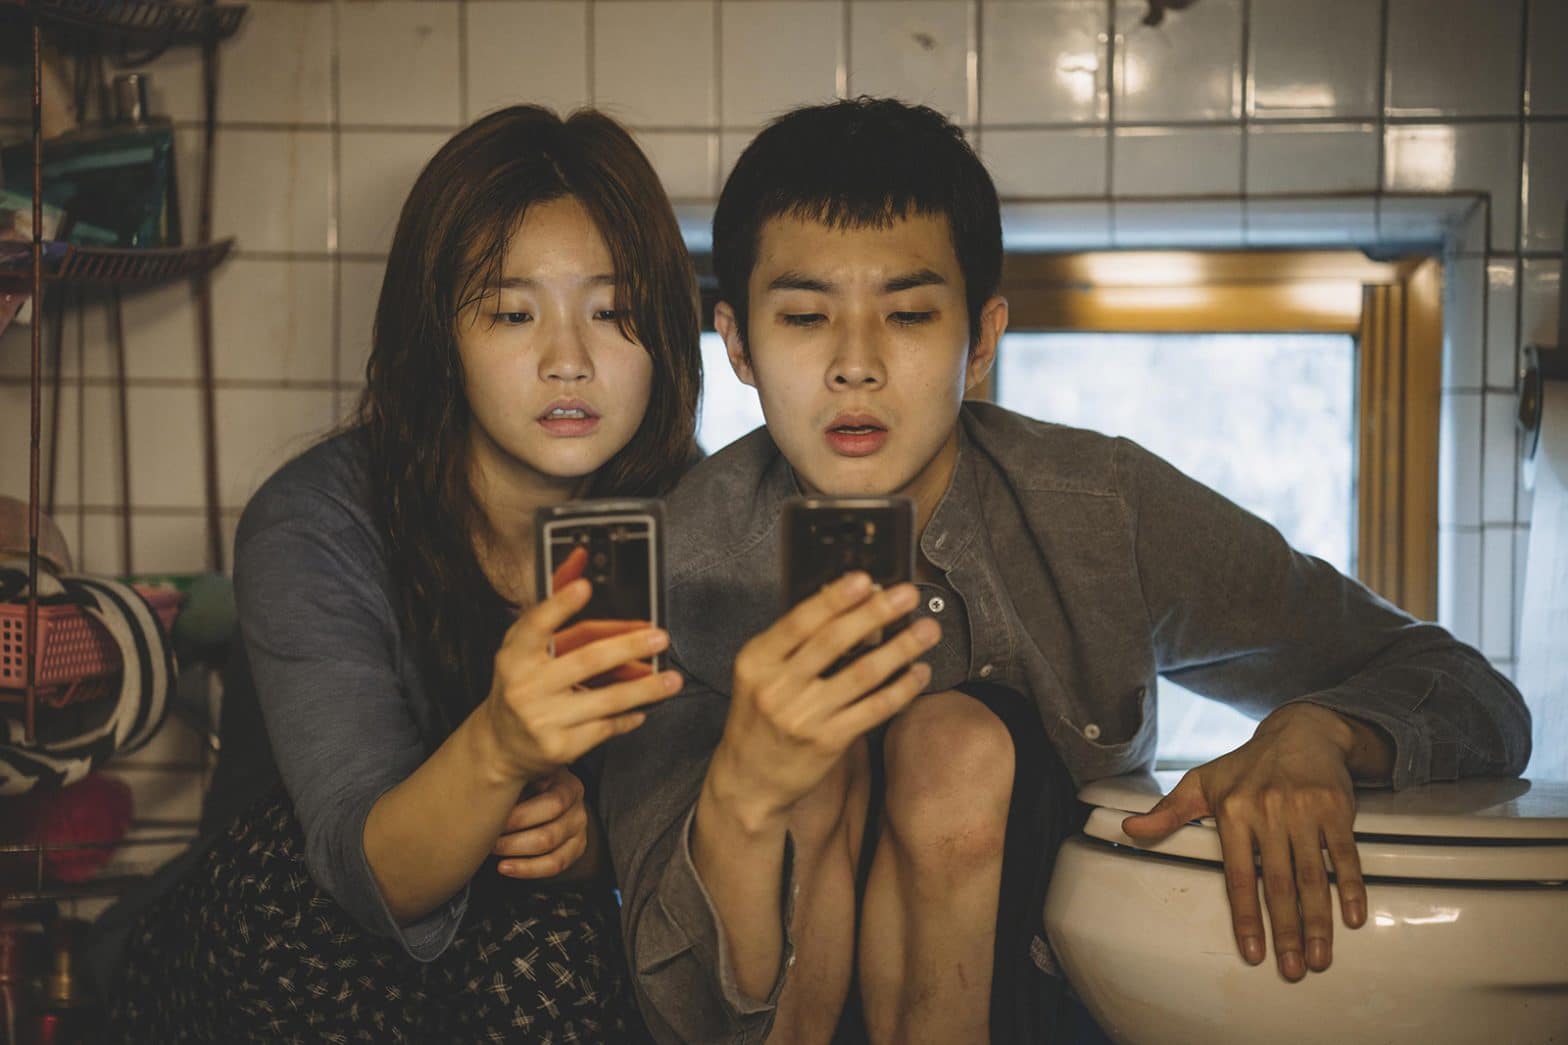 How Oscar-Winner ‘Parasite’ Reveals Gold Spoon and Dirt Spoon Class Divide in South Korea